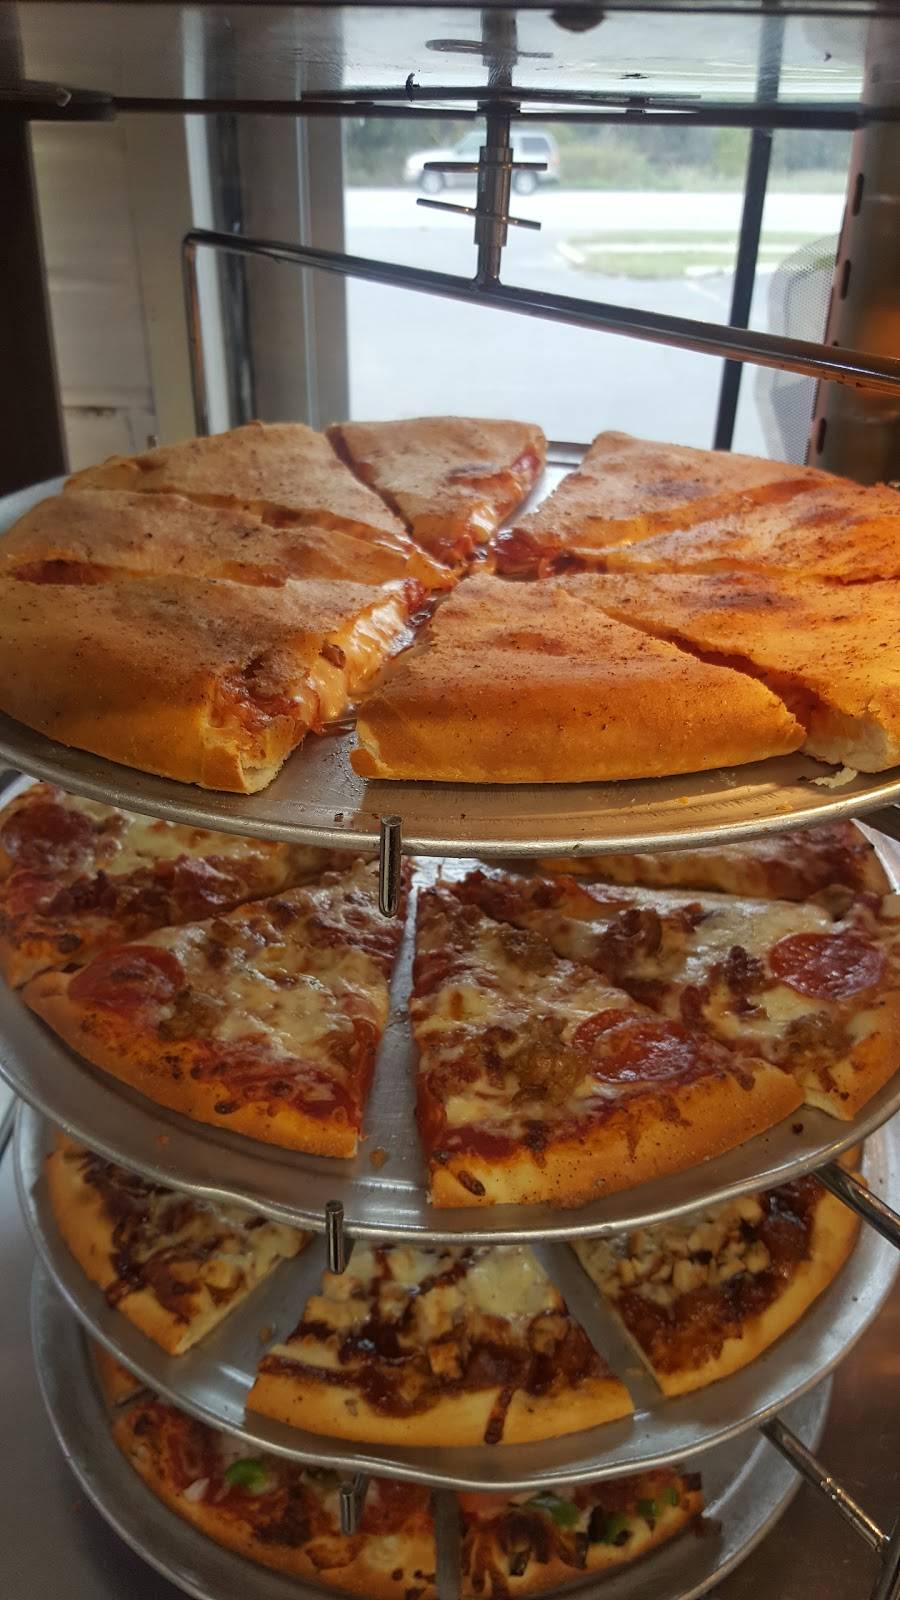 Samia Pizza | meal takeaway | 2977 W 5th Ave, Gary, IN 46404, USA | 2199771685 OR +1 219-977-1685